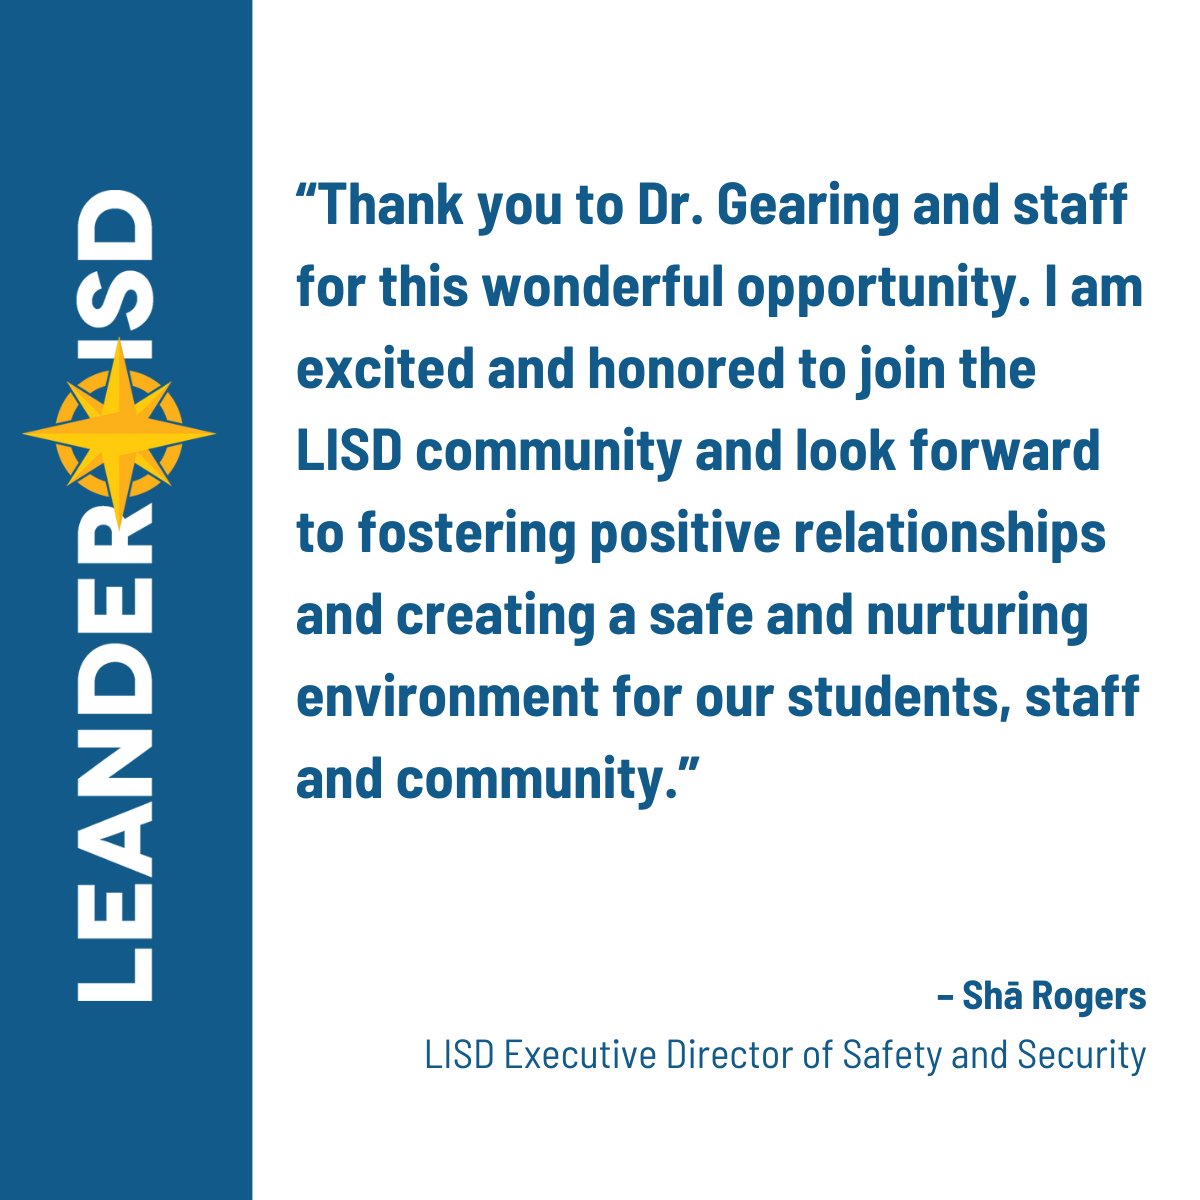 #1LISD is pleased to announce that Lucretia “Shā” Rogers has been selected as the district’s Executive Director of Safety & Security after the Board approved the hiring at Thursday’s meeting. Read more: bit.ly/4dA3GTe #NoPlaceLikeLISD